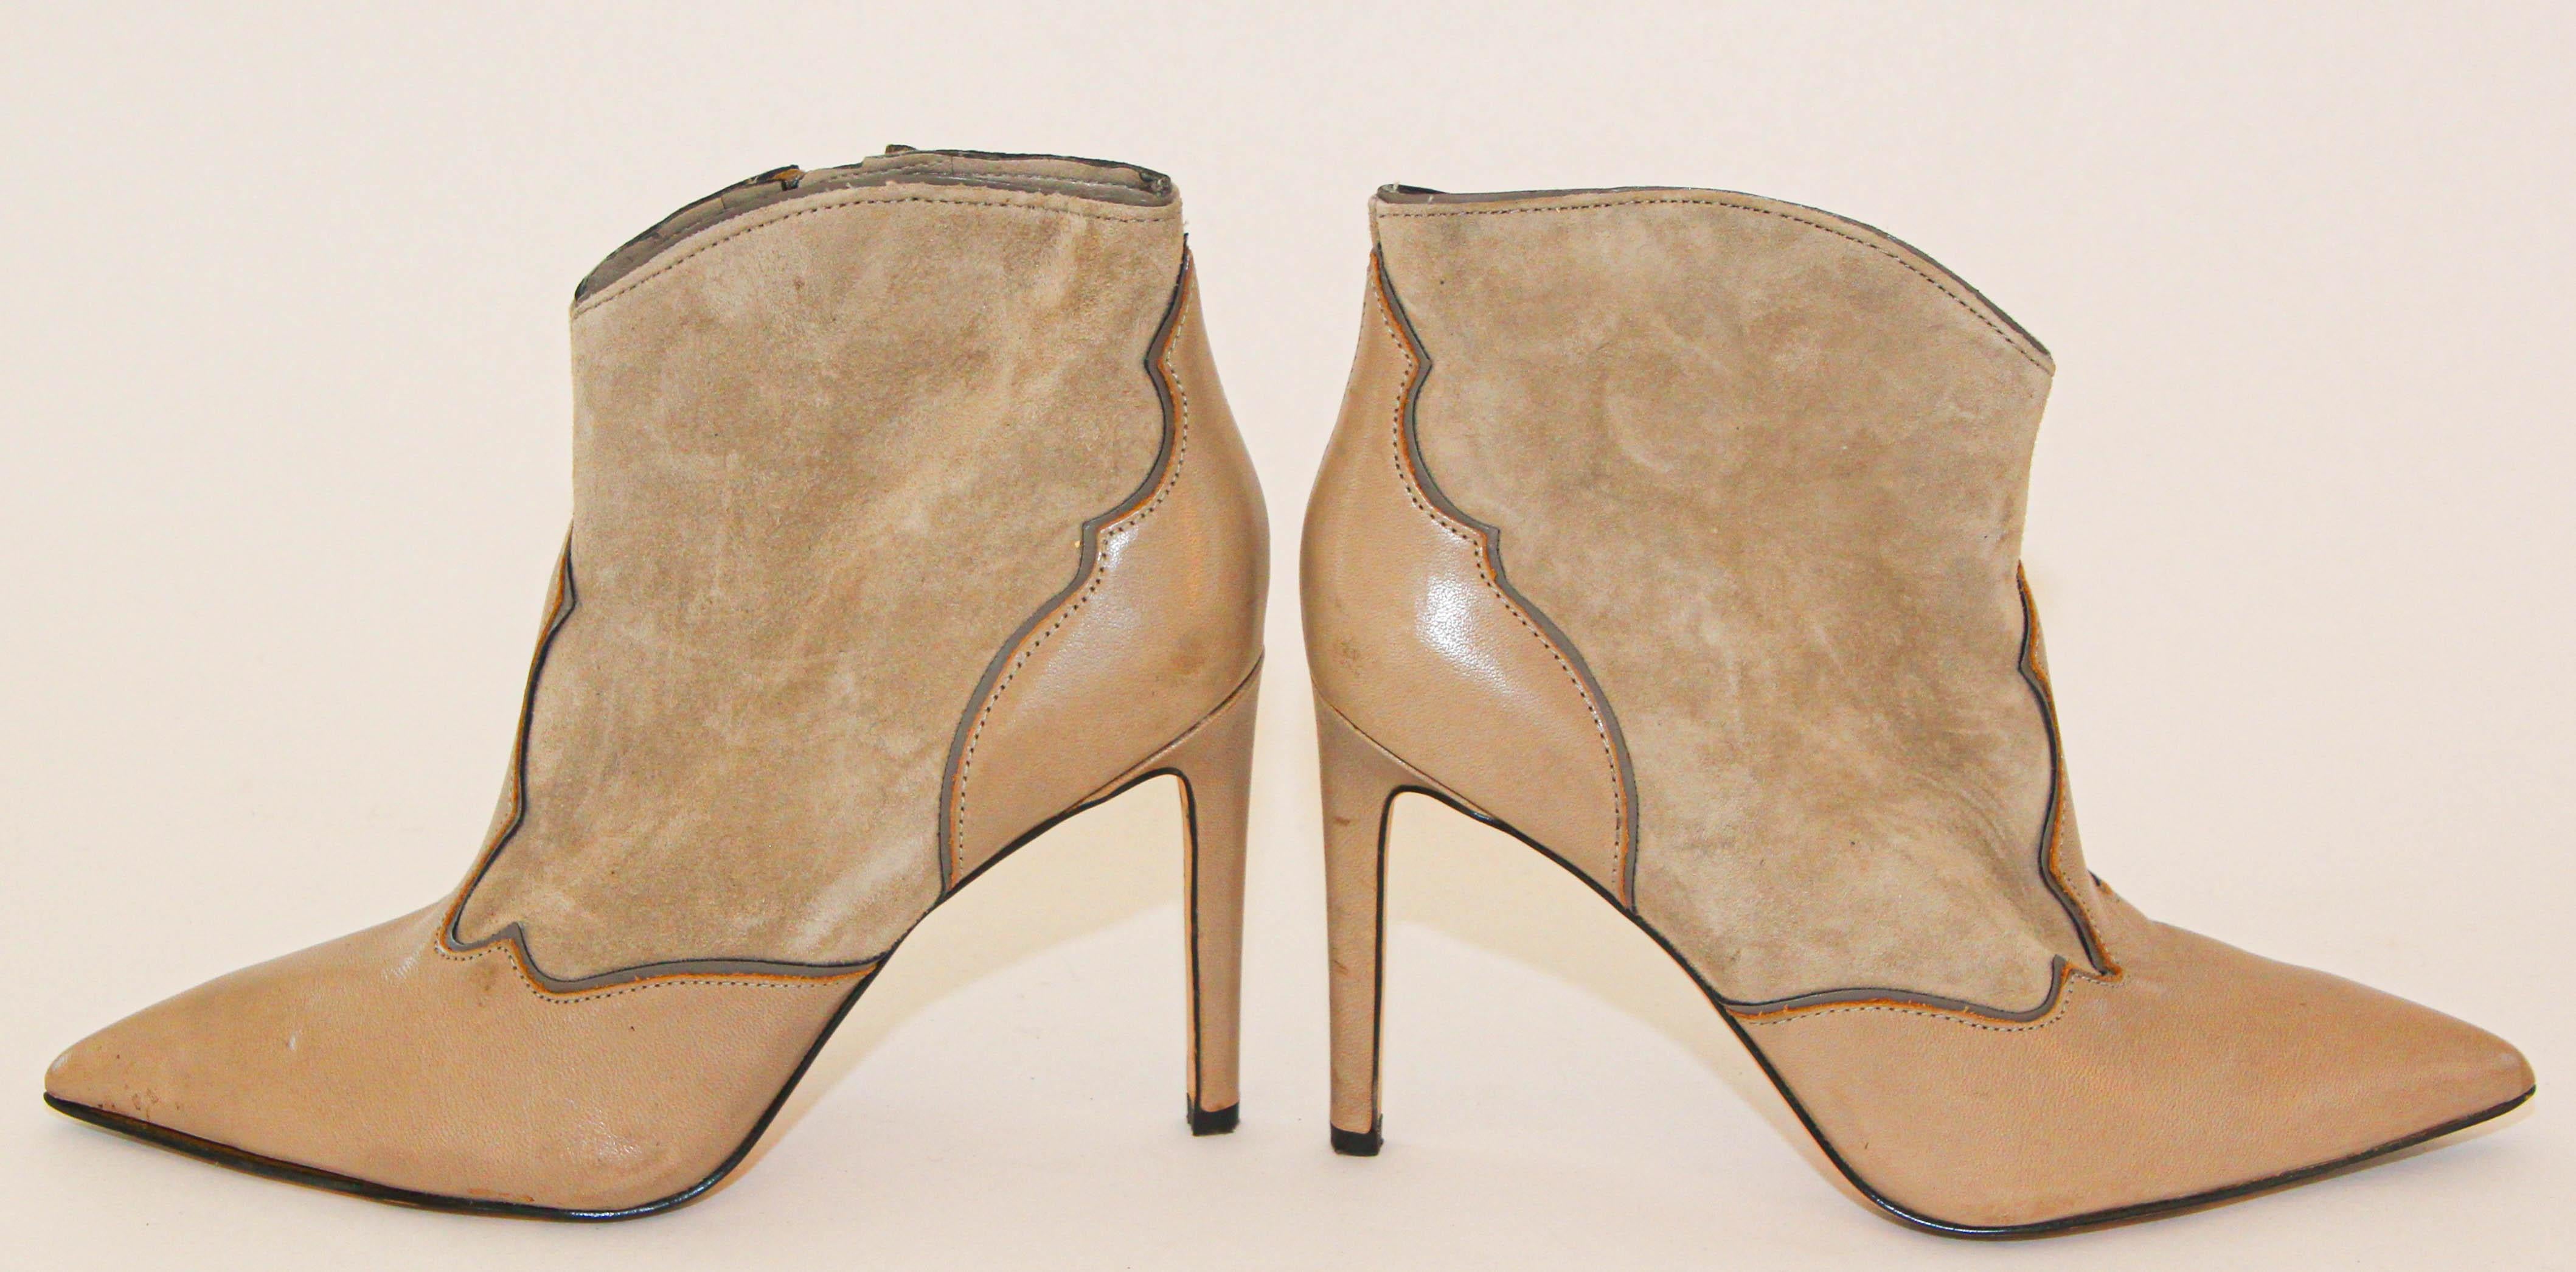 Sam Edelman High Heels Tan Leather Women Ankle Booties Stiletto Size 7 For Sale 3